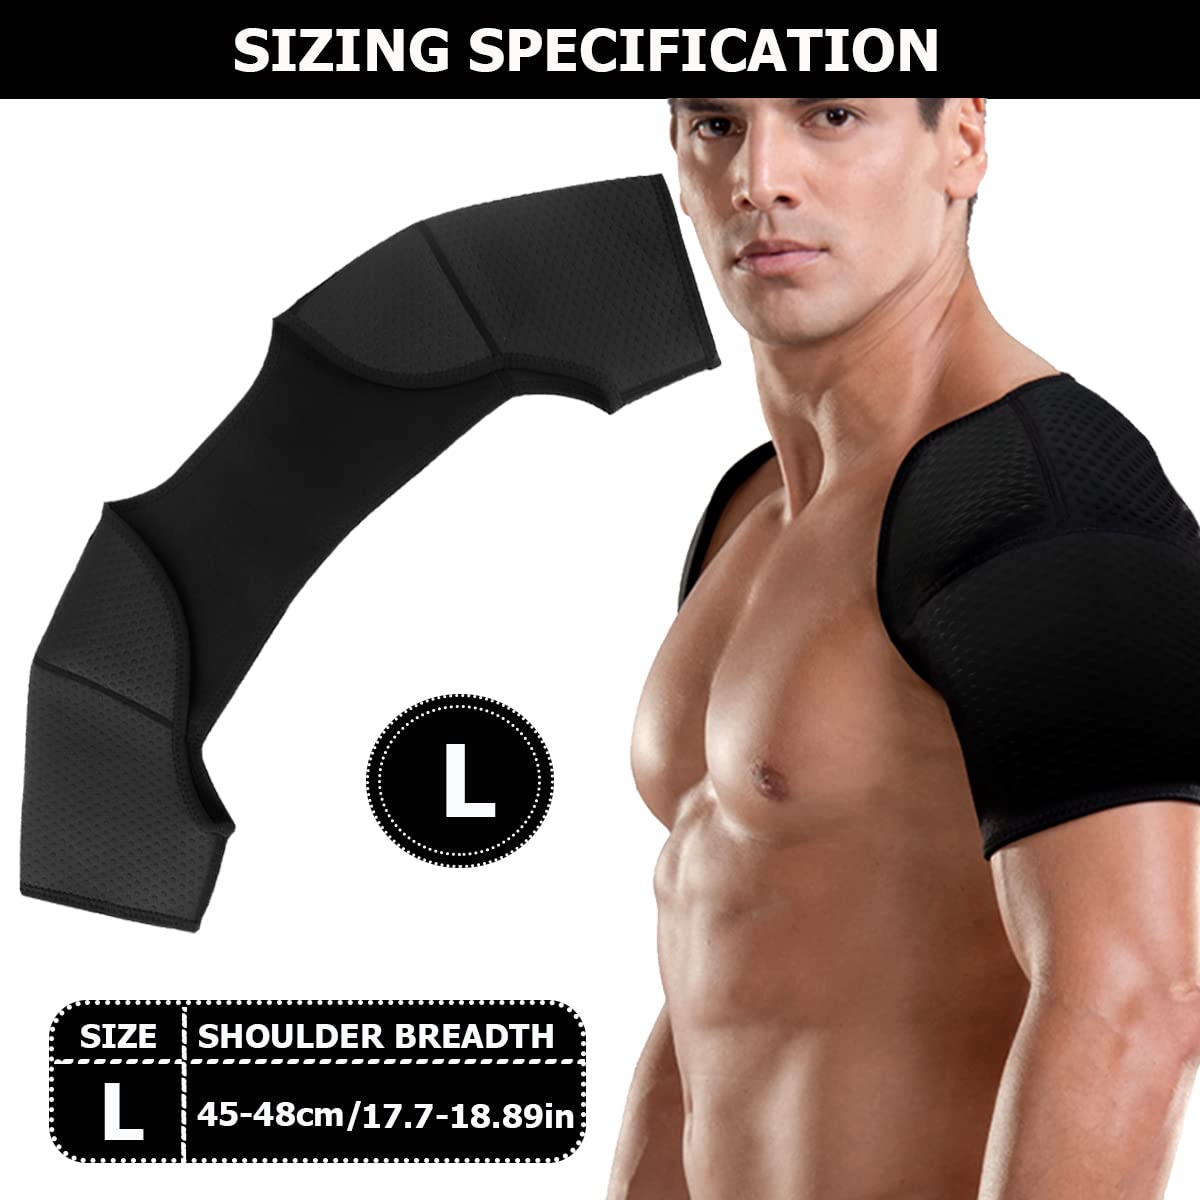 Double Shoulder Brace, Durable and Comfortable Double Shoulder -Breathable Sports Protective Gear for Chronic Tendinitis Pain Relief, Shoulder Strap Brace for Sleeping Outdoor Lifting Sports